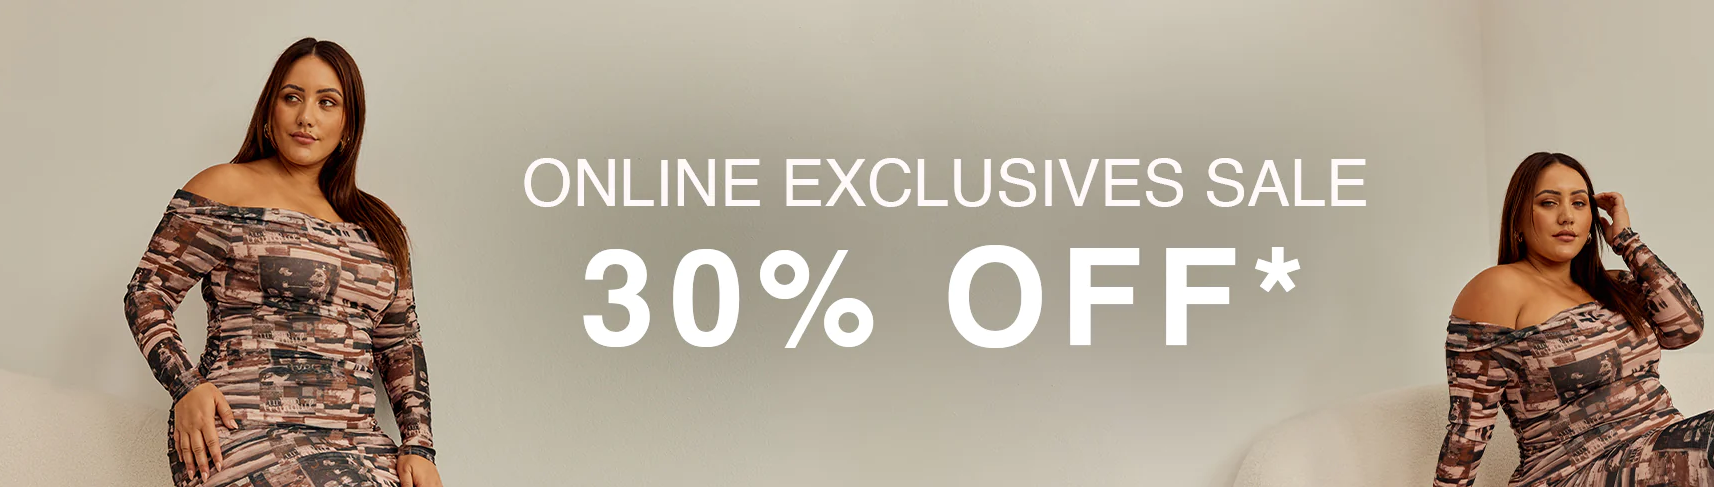 You + All Flash sale - Extra 30% OFF online exclusives